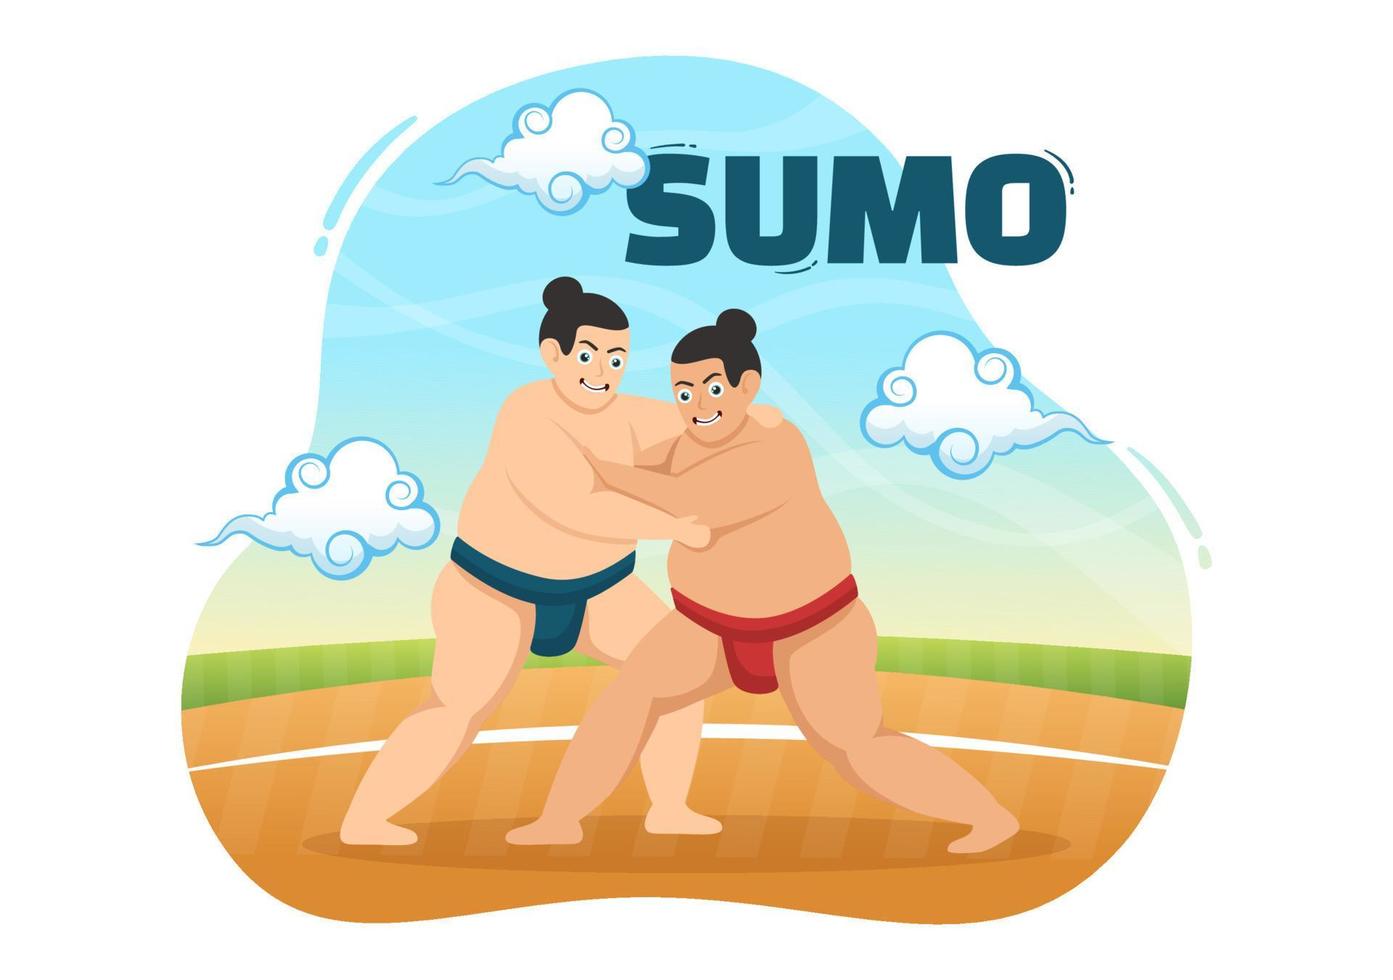 Sumo Wrestler Illustration with Fighting Japanese Traditional Martial Art and Sport Activity in Flat Cartoon Hand Drawn Landing Page Templates vector